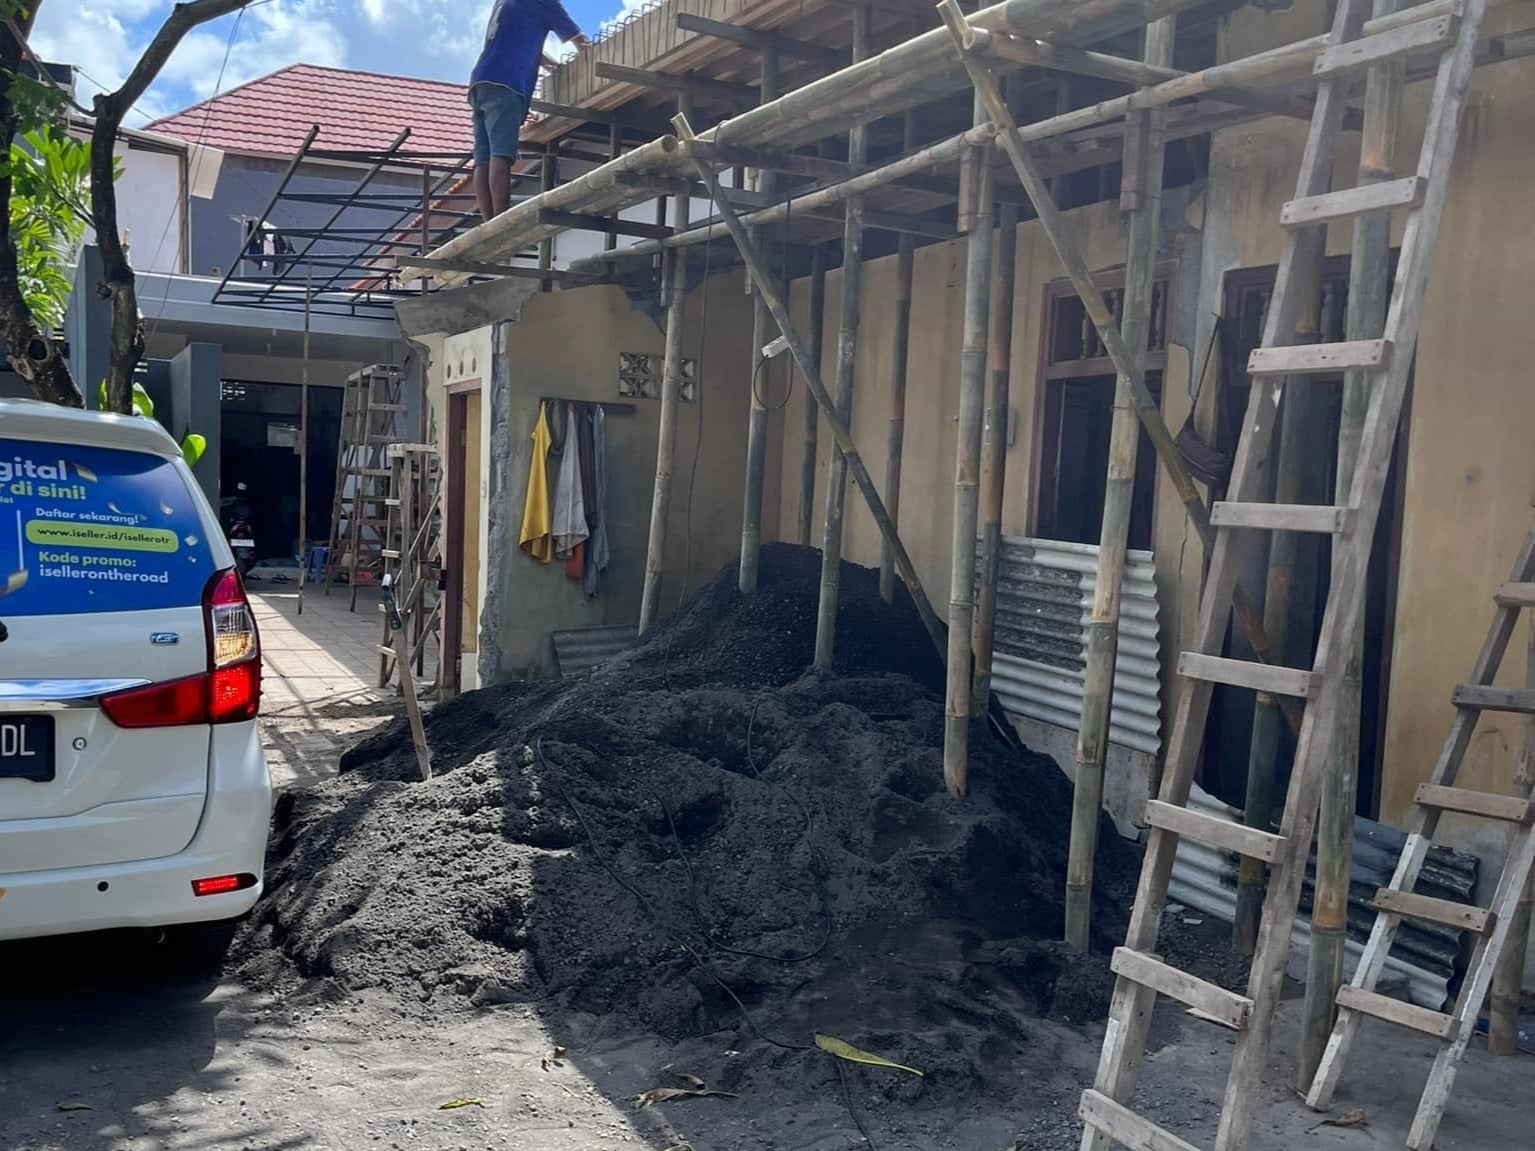 The shocked holidaymakers posted photos of the outside of the villa surrounded by construction work